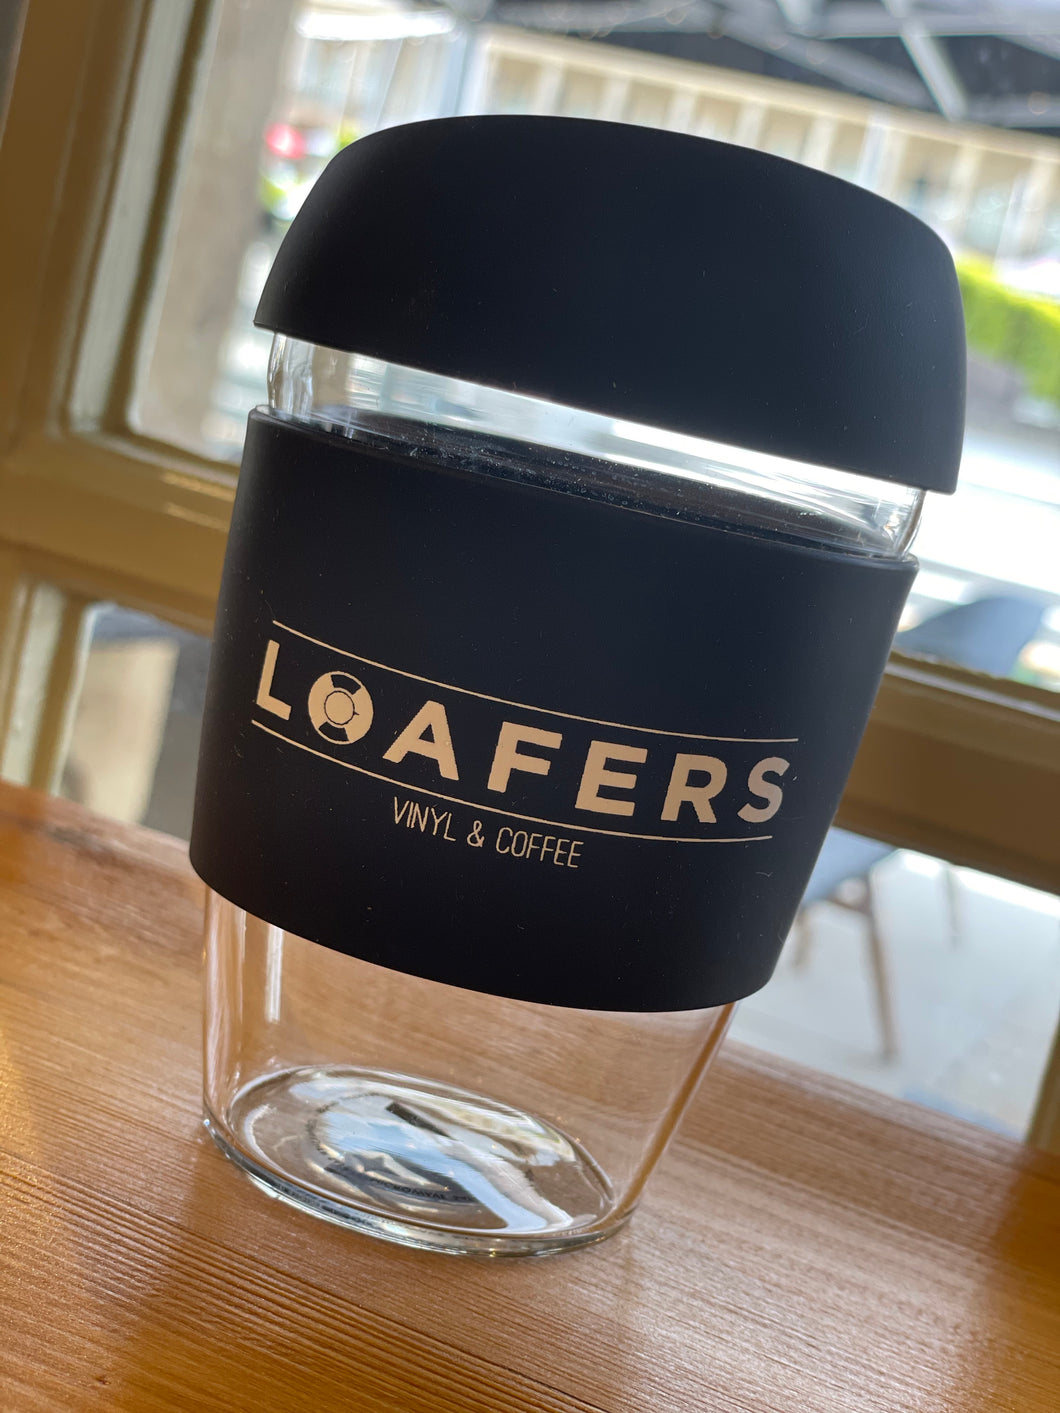 Loafers Hot Reusable Drink Cup